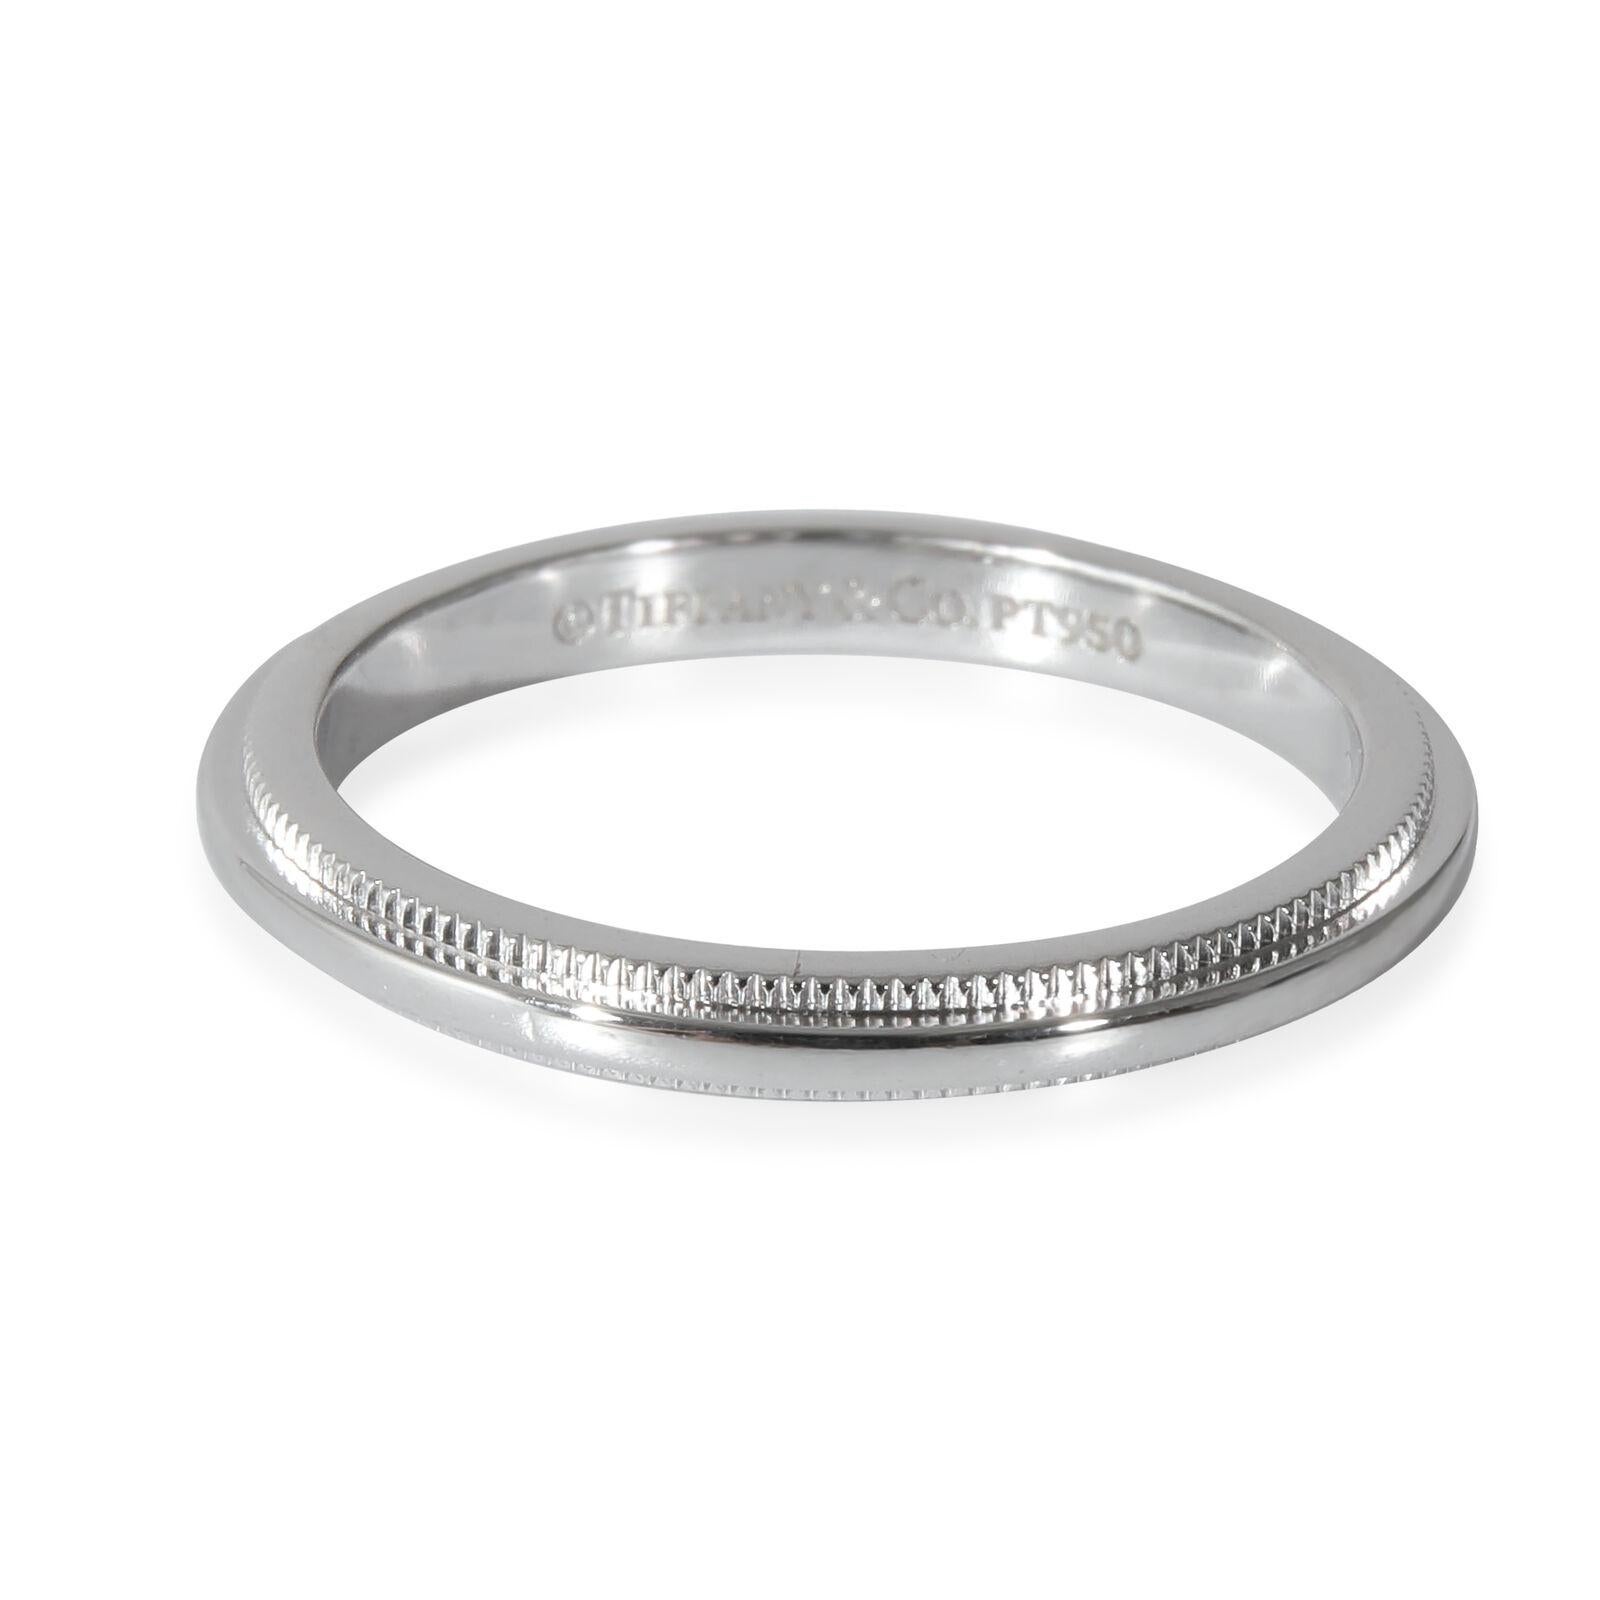 Tiffany & Co. Milgrain 2mm Band Ring  in Platinum Size 6 In Excellent Condition For Sale In New York, NY